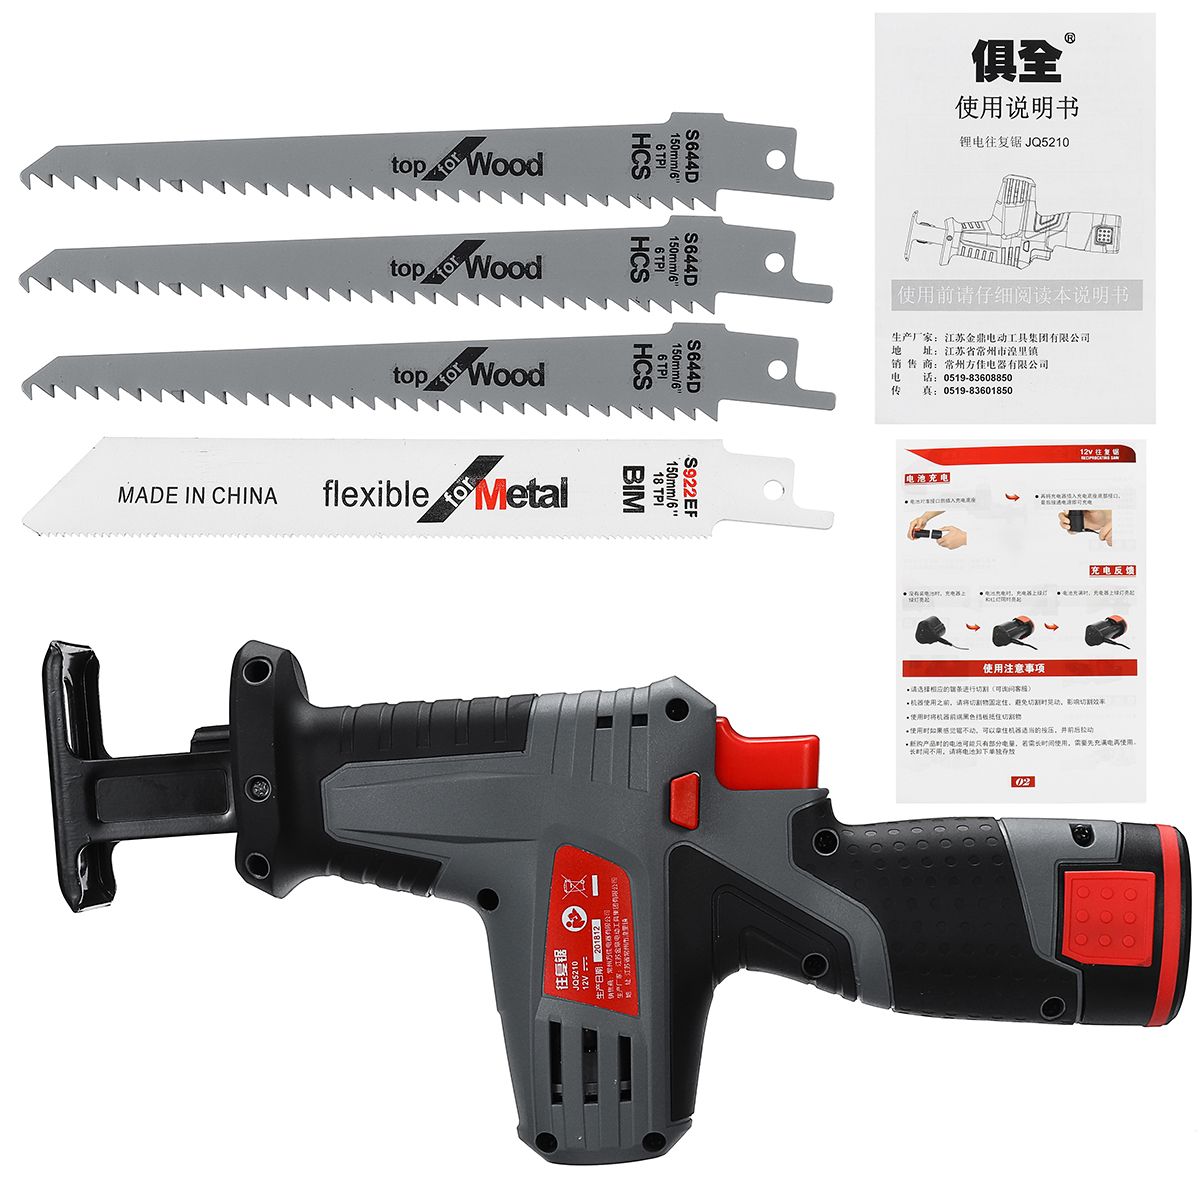 12V-Lithium-Ion-Cordless-Reciprocating-Saw-Kit-with-4x-Wood-Blades-Wood-Metal-Cutting-Power-Tools-1558122